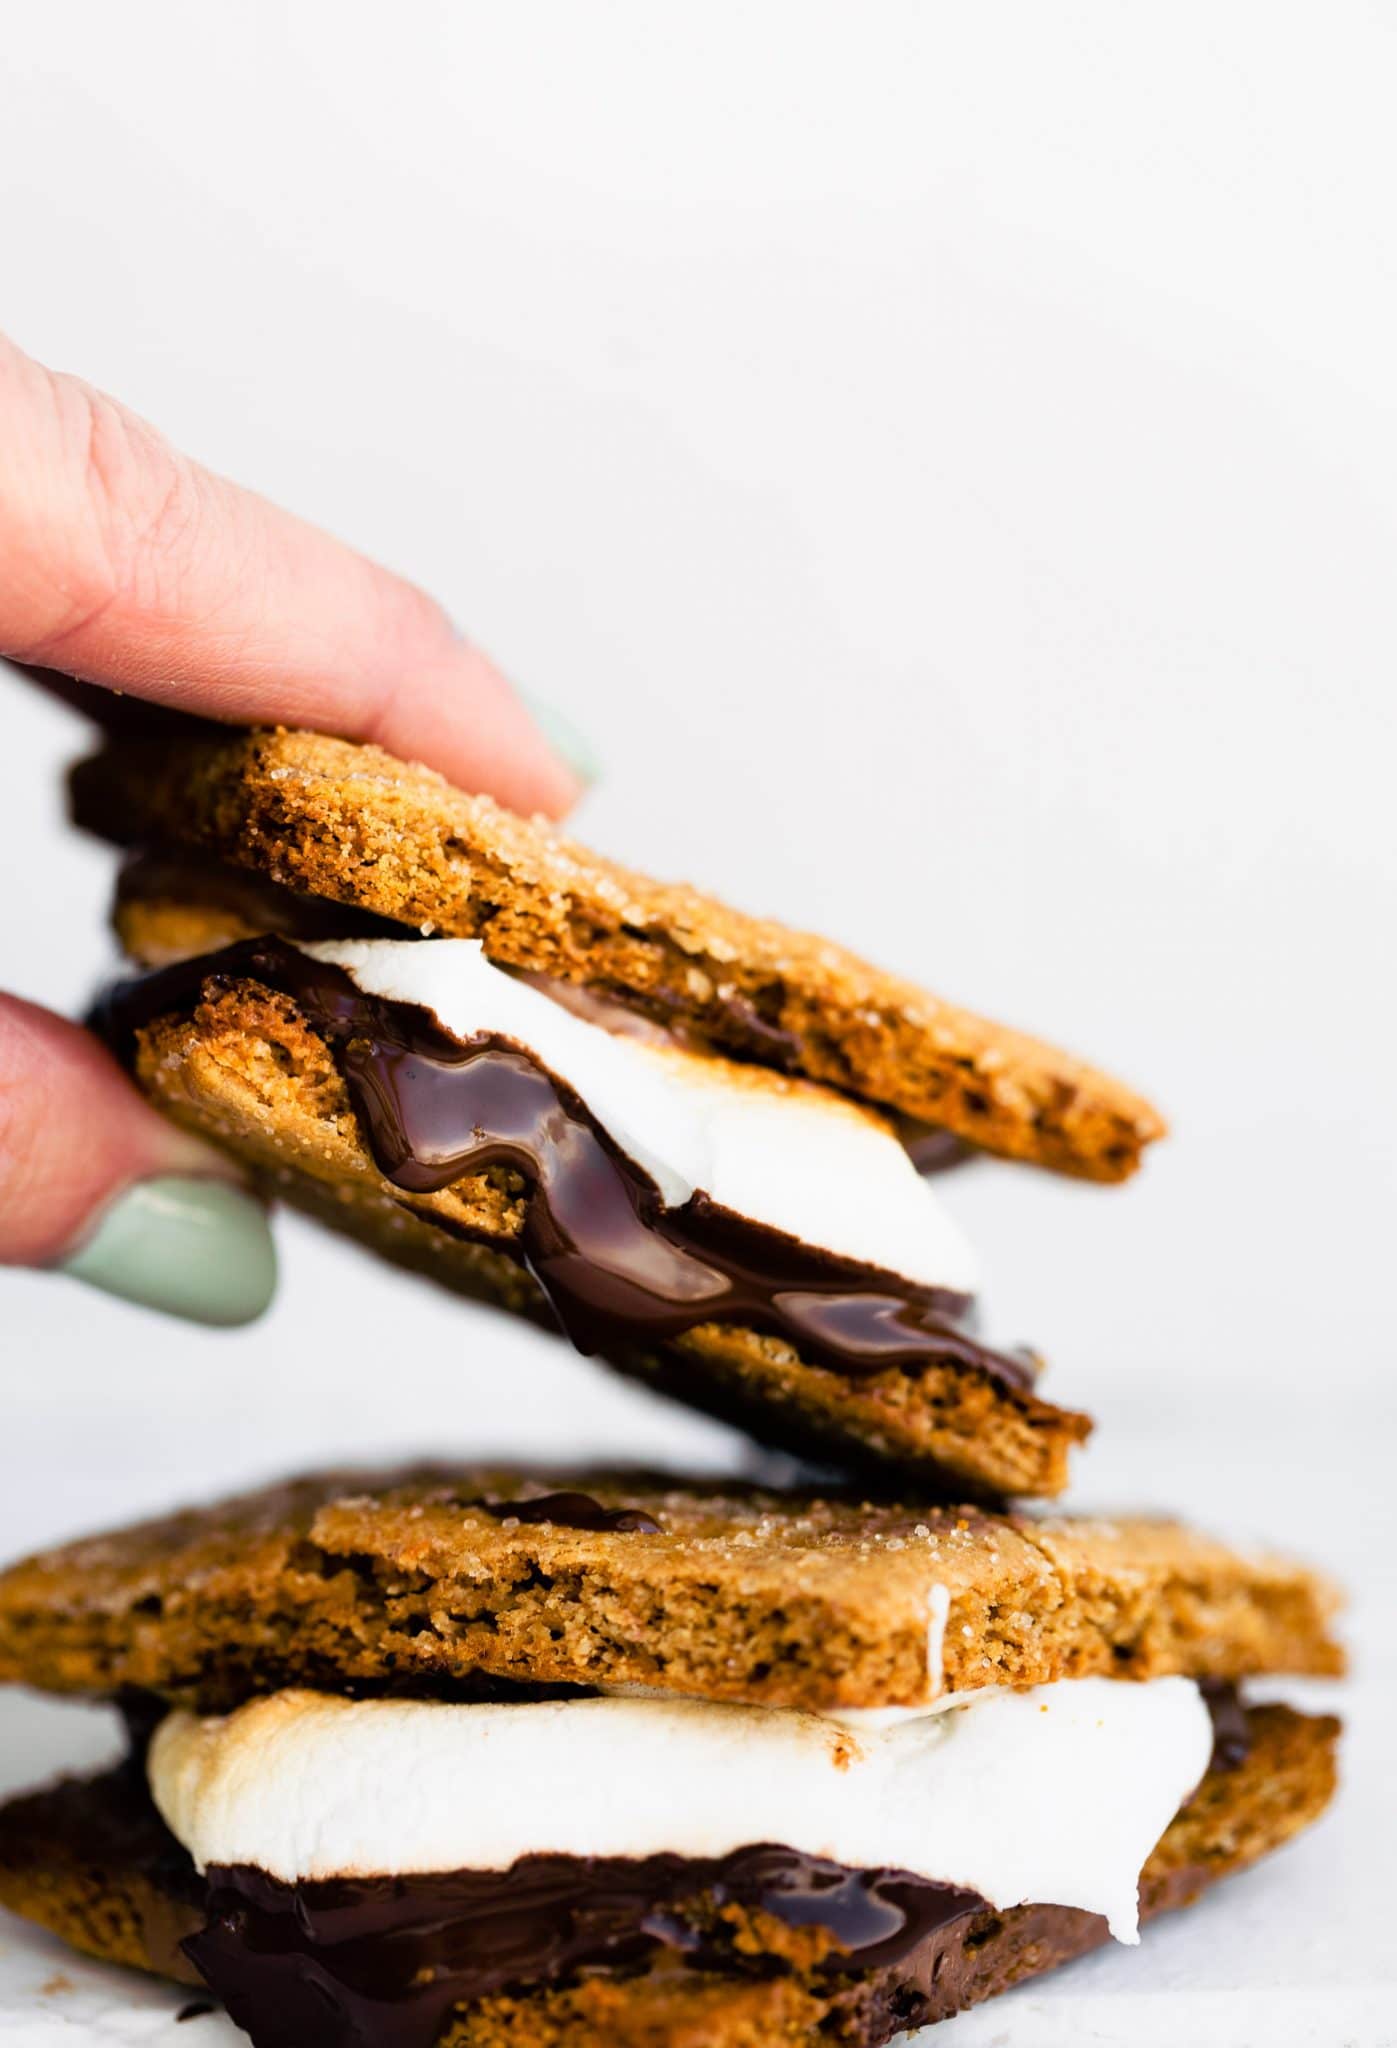 Close up image of a hand grabbing a homemade oven baked gluten free smore from a stack of two.